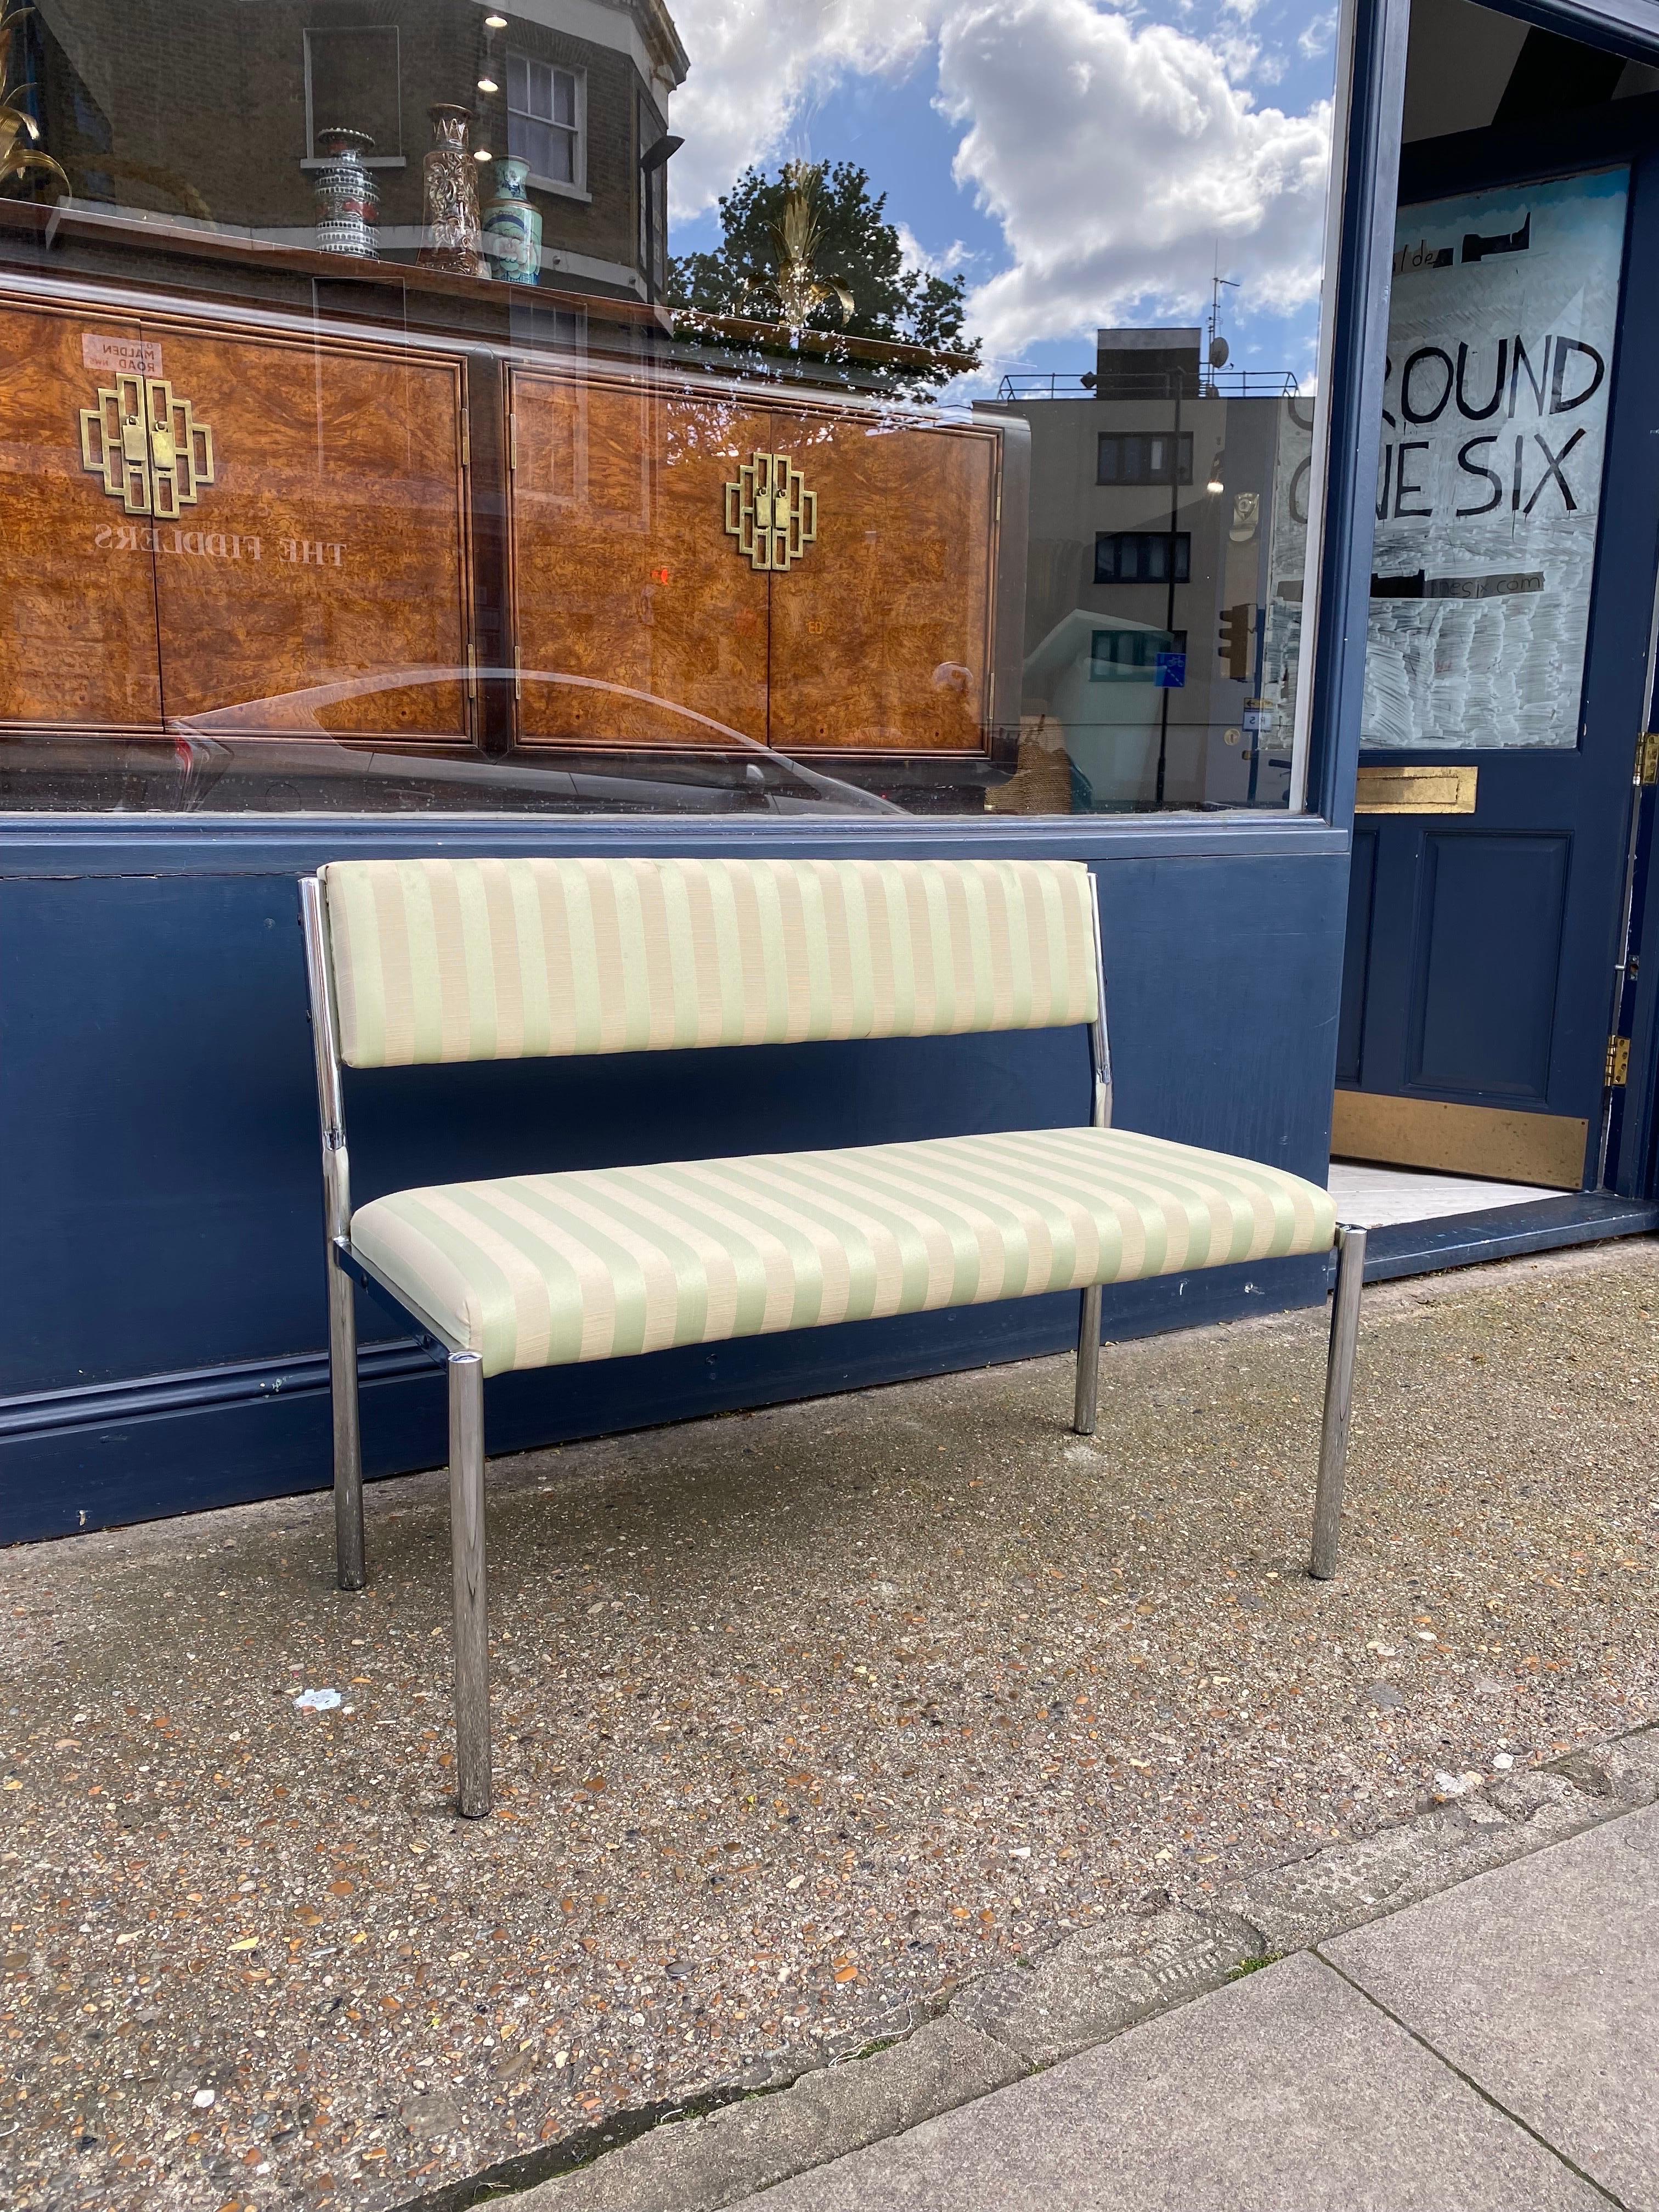 Italian perfectly proportioned and comfortable chrome bench with cotton satin green stripes fabric in a mint shade. Quite difficult to find pleasing benches and we believe this one is just great! 

The tubular chrome steel frame has great